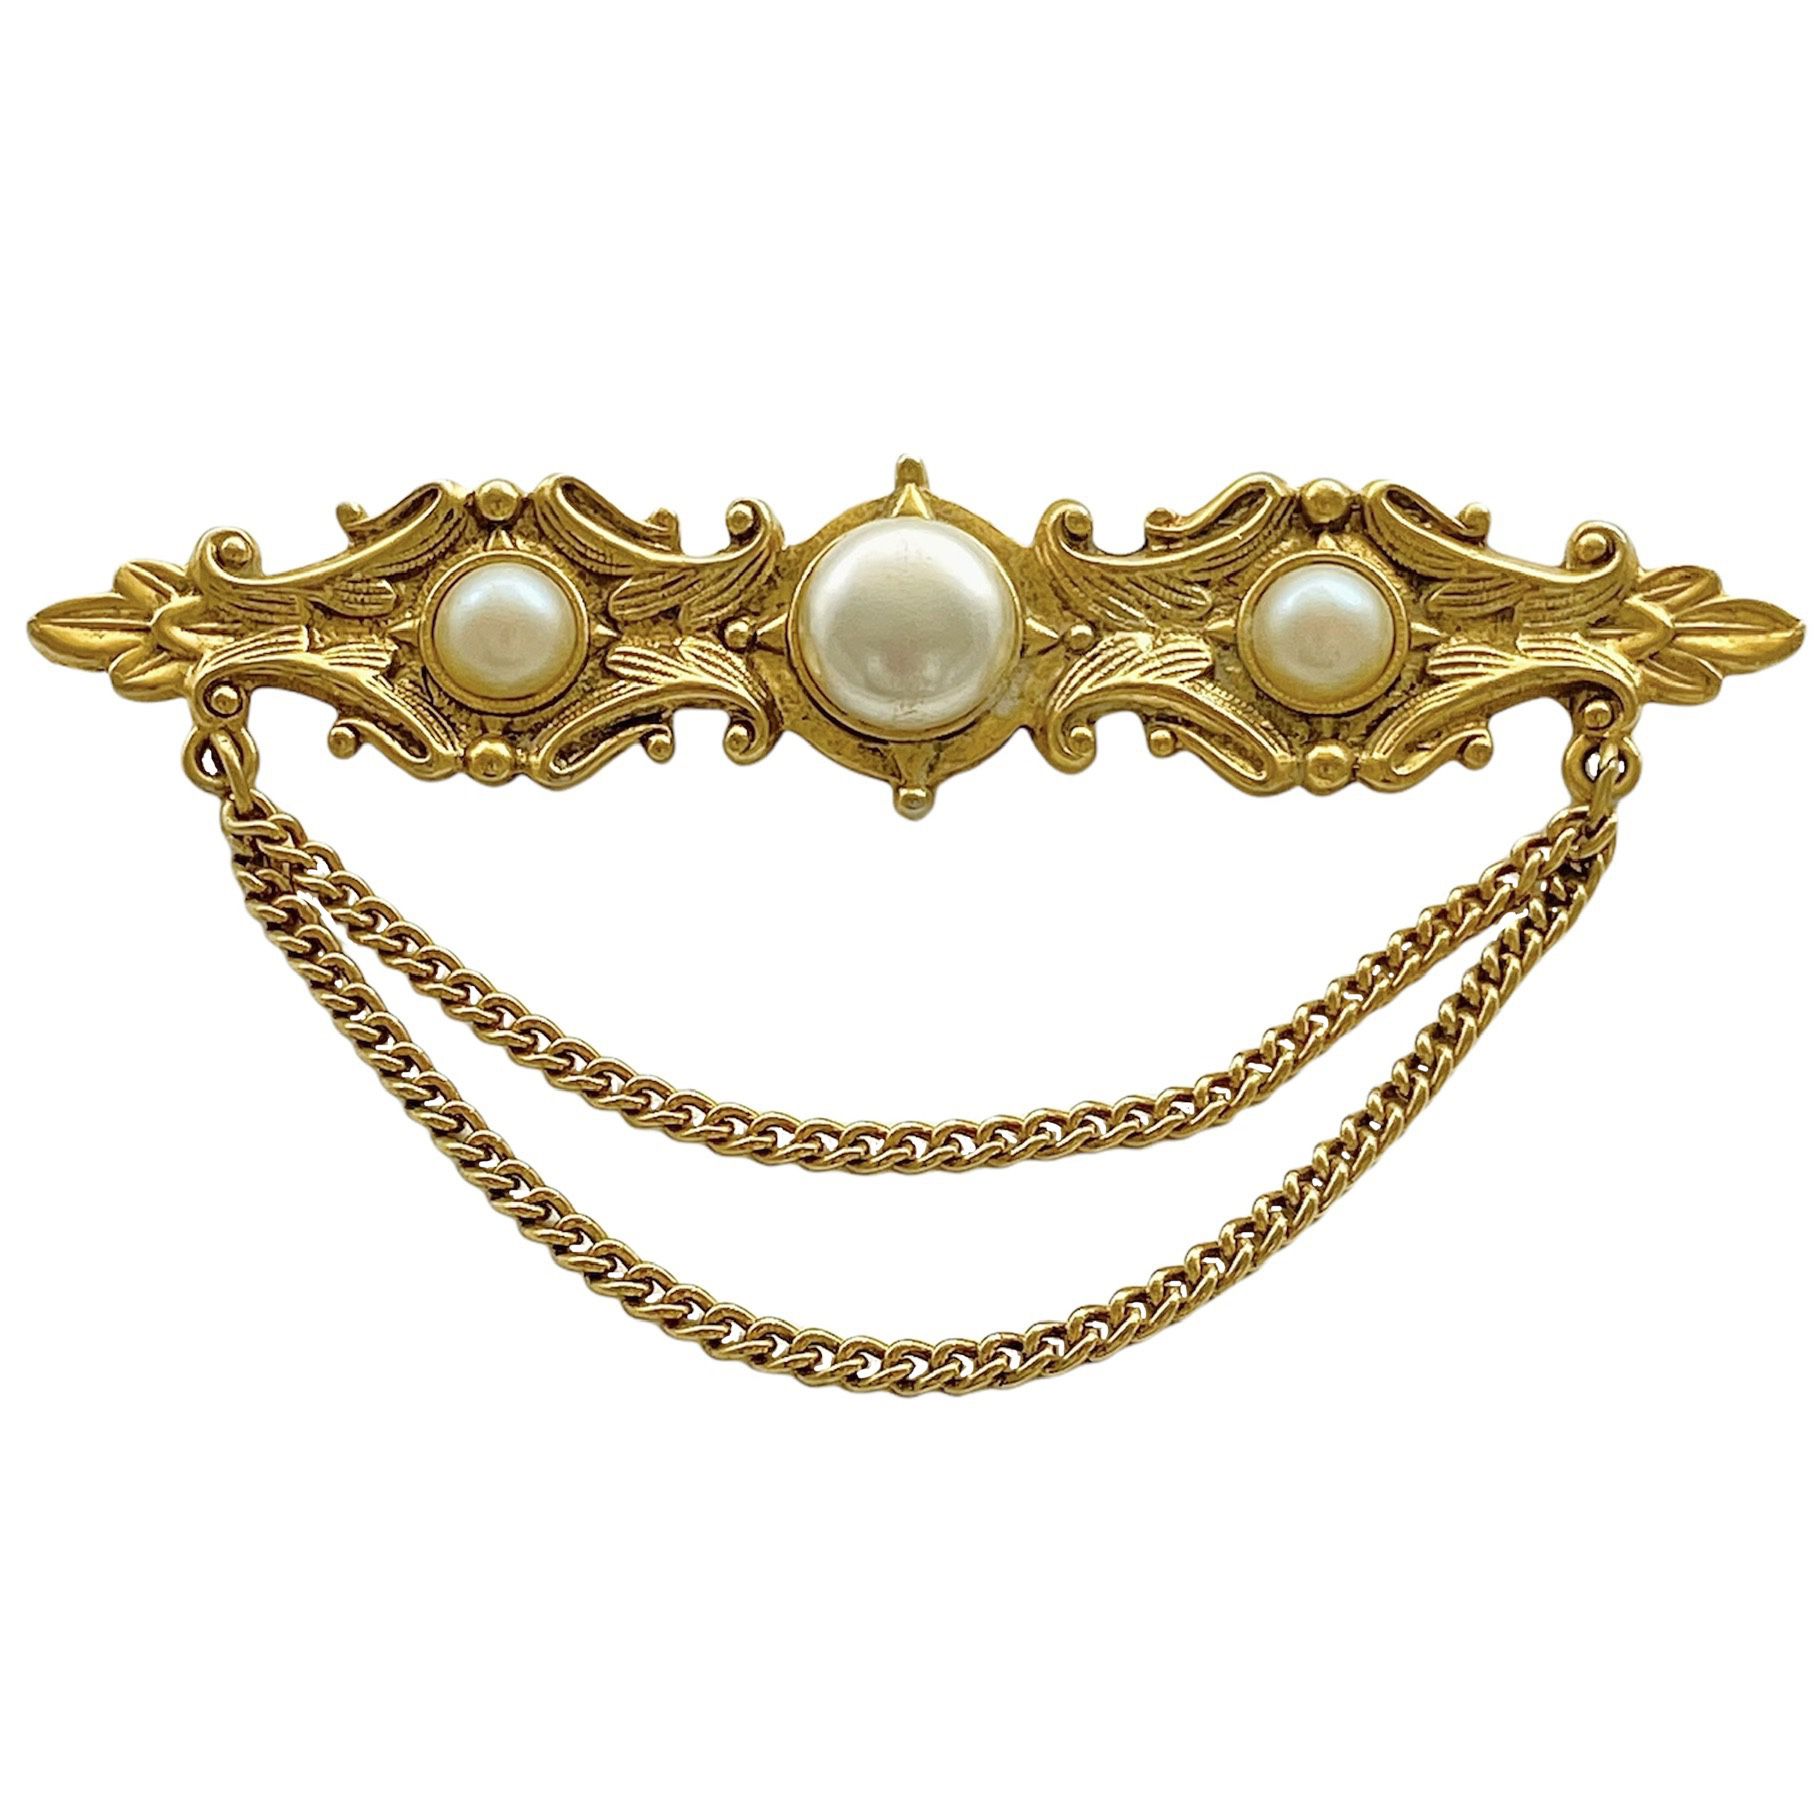 Victorian Style Collar Brooch - Gold Plated Faux Pearls Bar Pin - Vintage Fashion Jewelry 